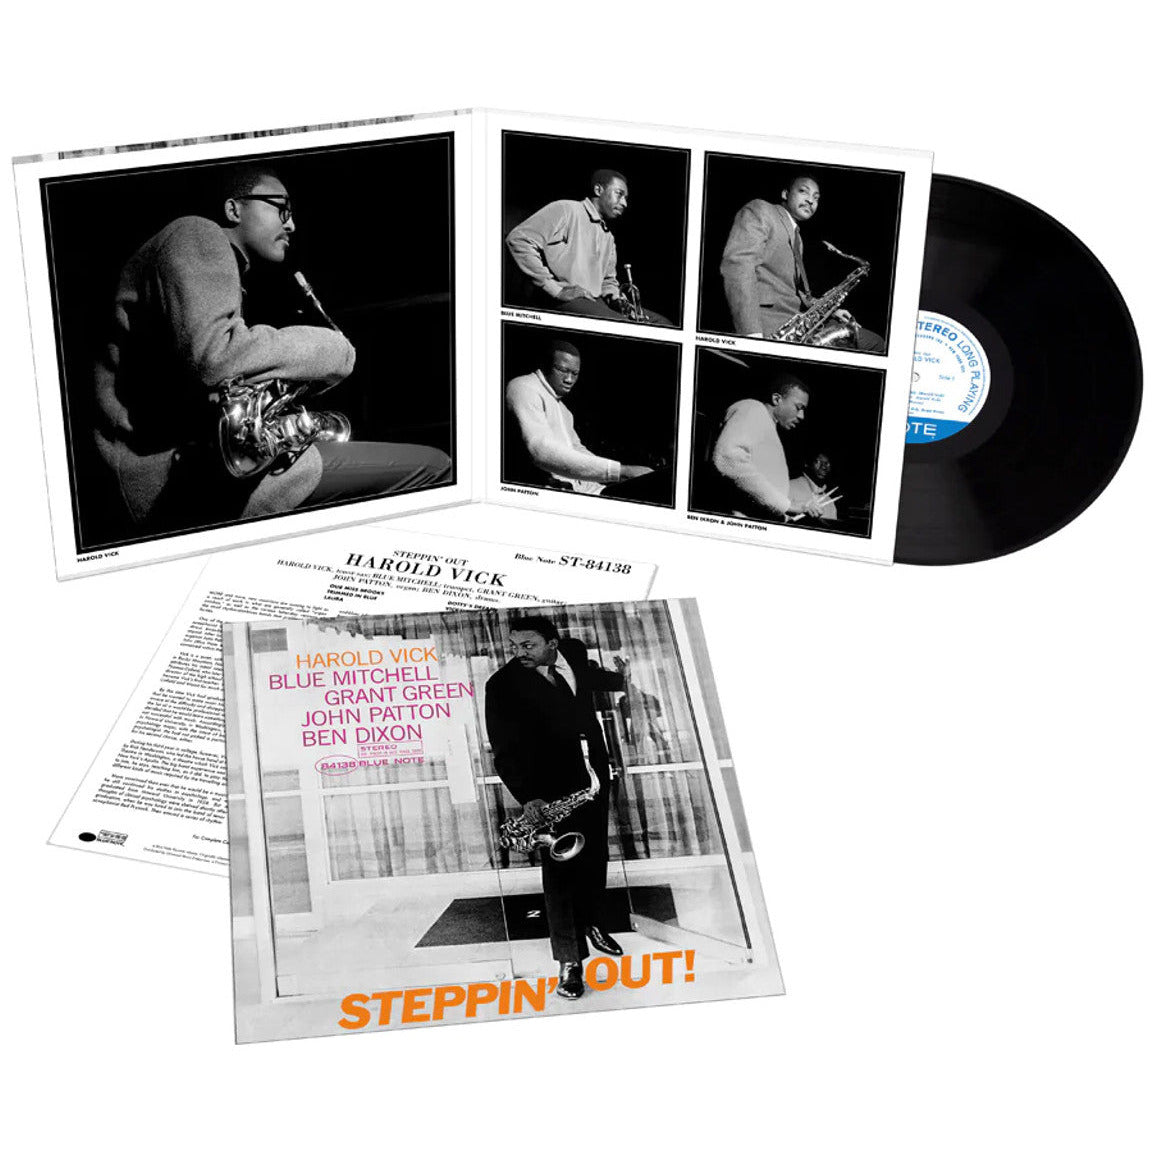 Harold Vick – Steppin‘ Out – Tone Poet LP 